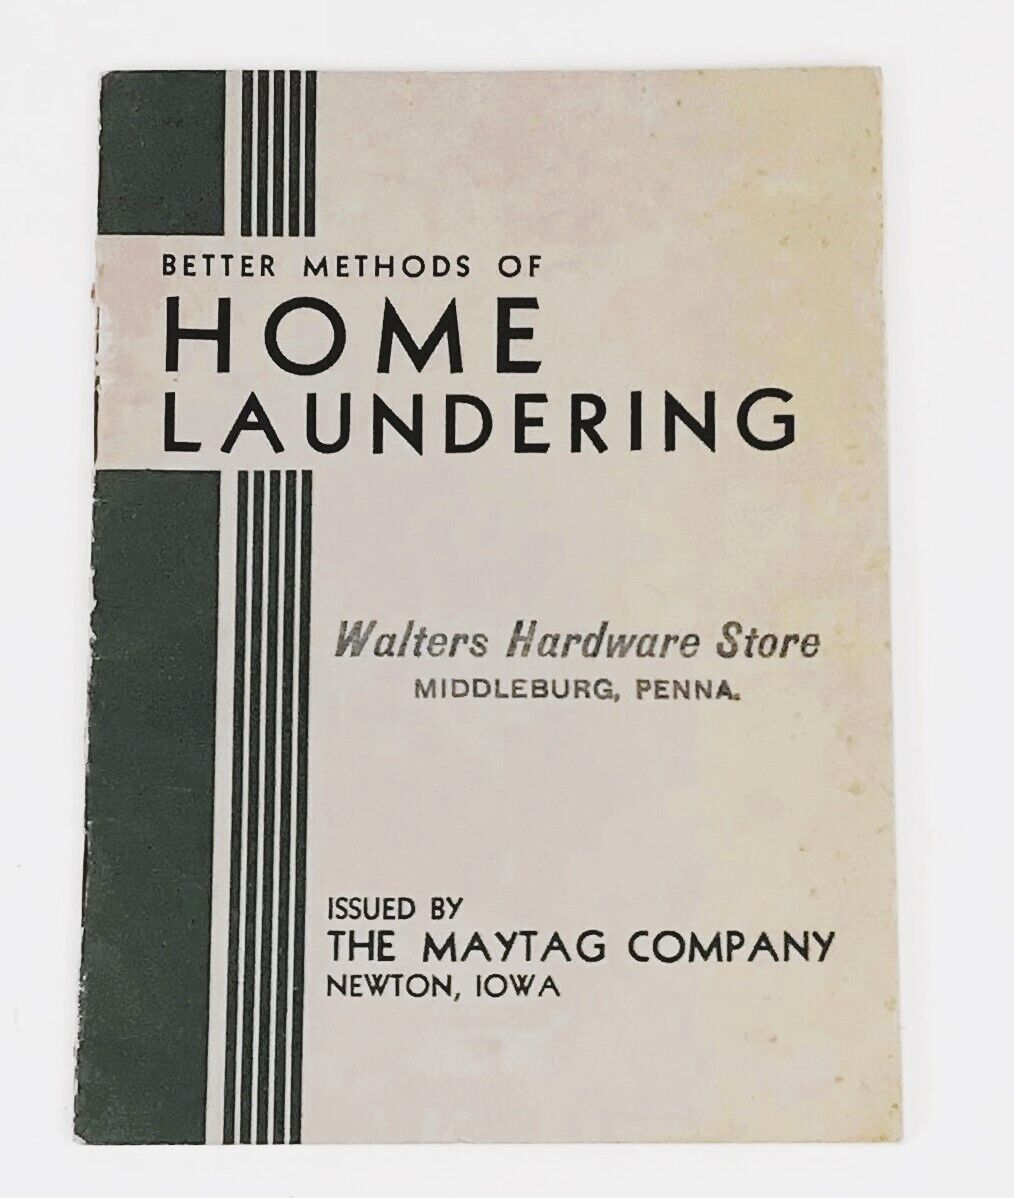 Middleburg PA Home Laundering Booklet 1936 The Maytag Company Walters  e255